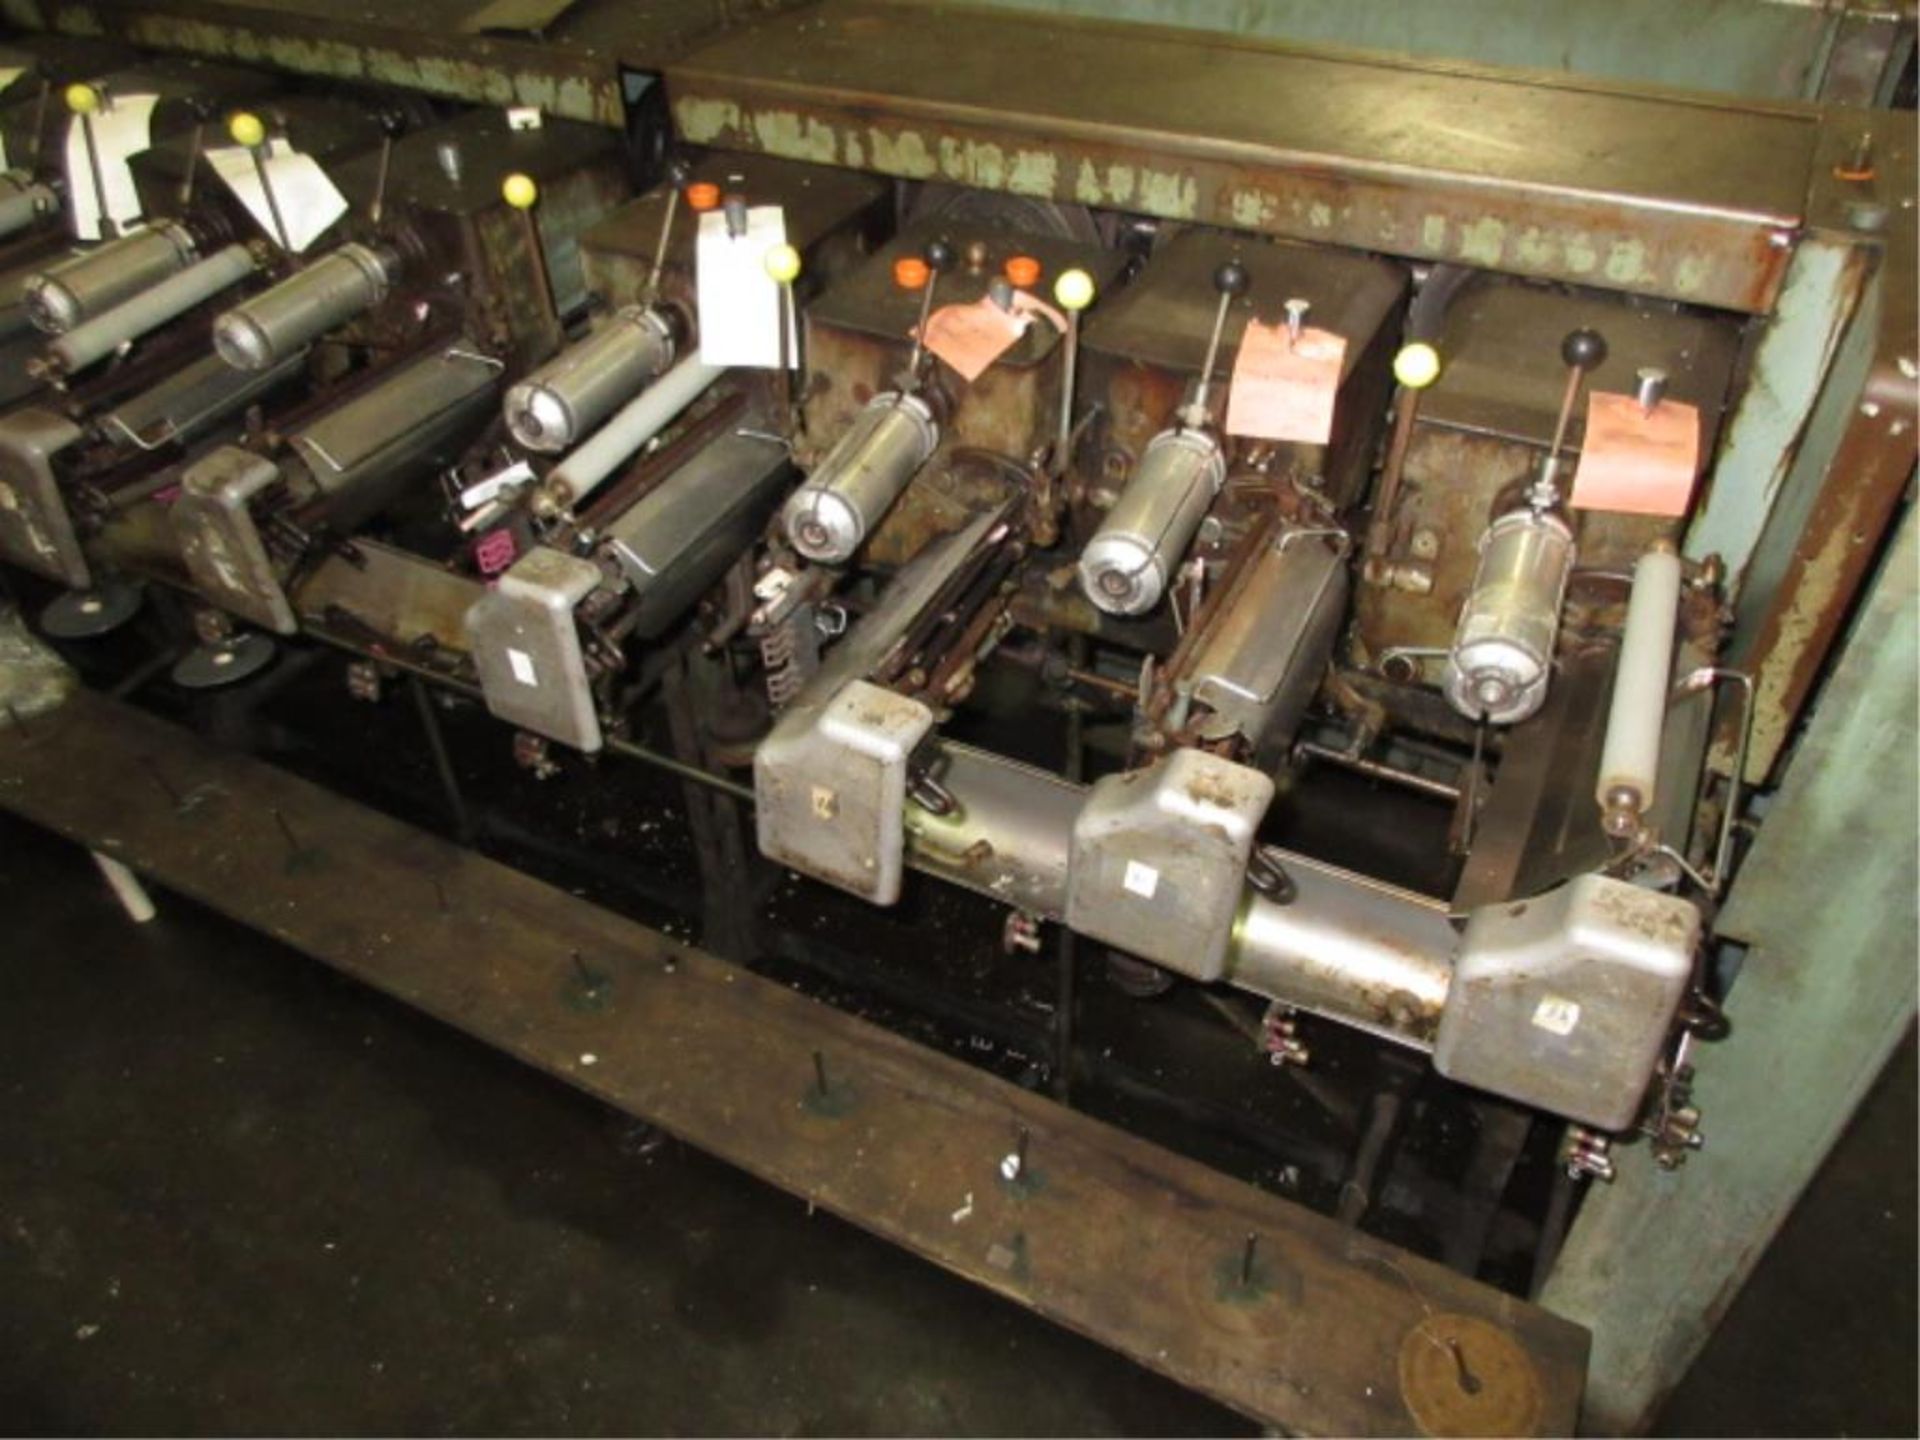 Schweiter Precision Winder, 32 position, said to be in running condition. SN# 1542/69. HIT# 2179281. - Image 2 of 5